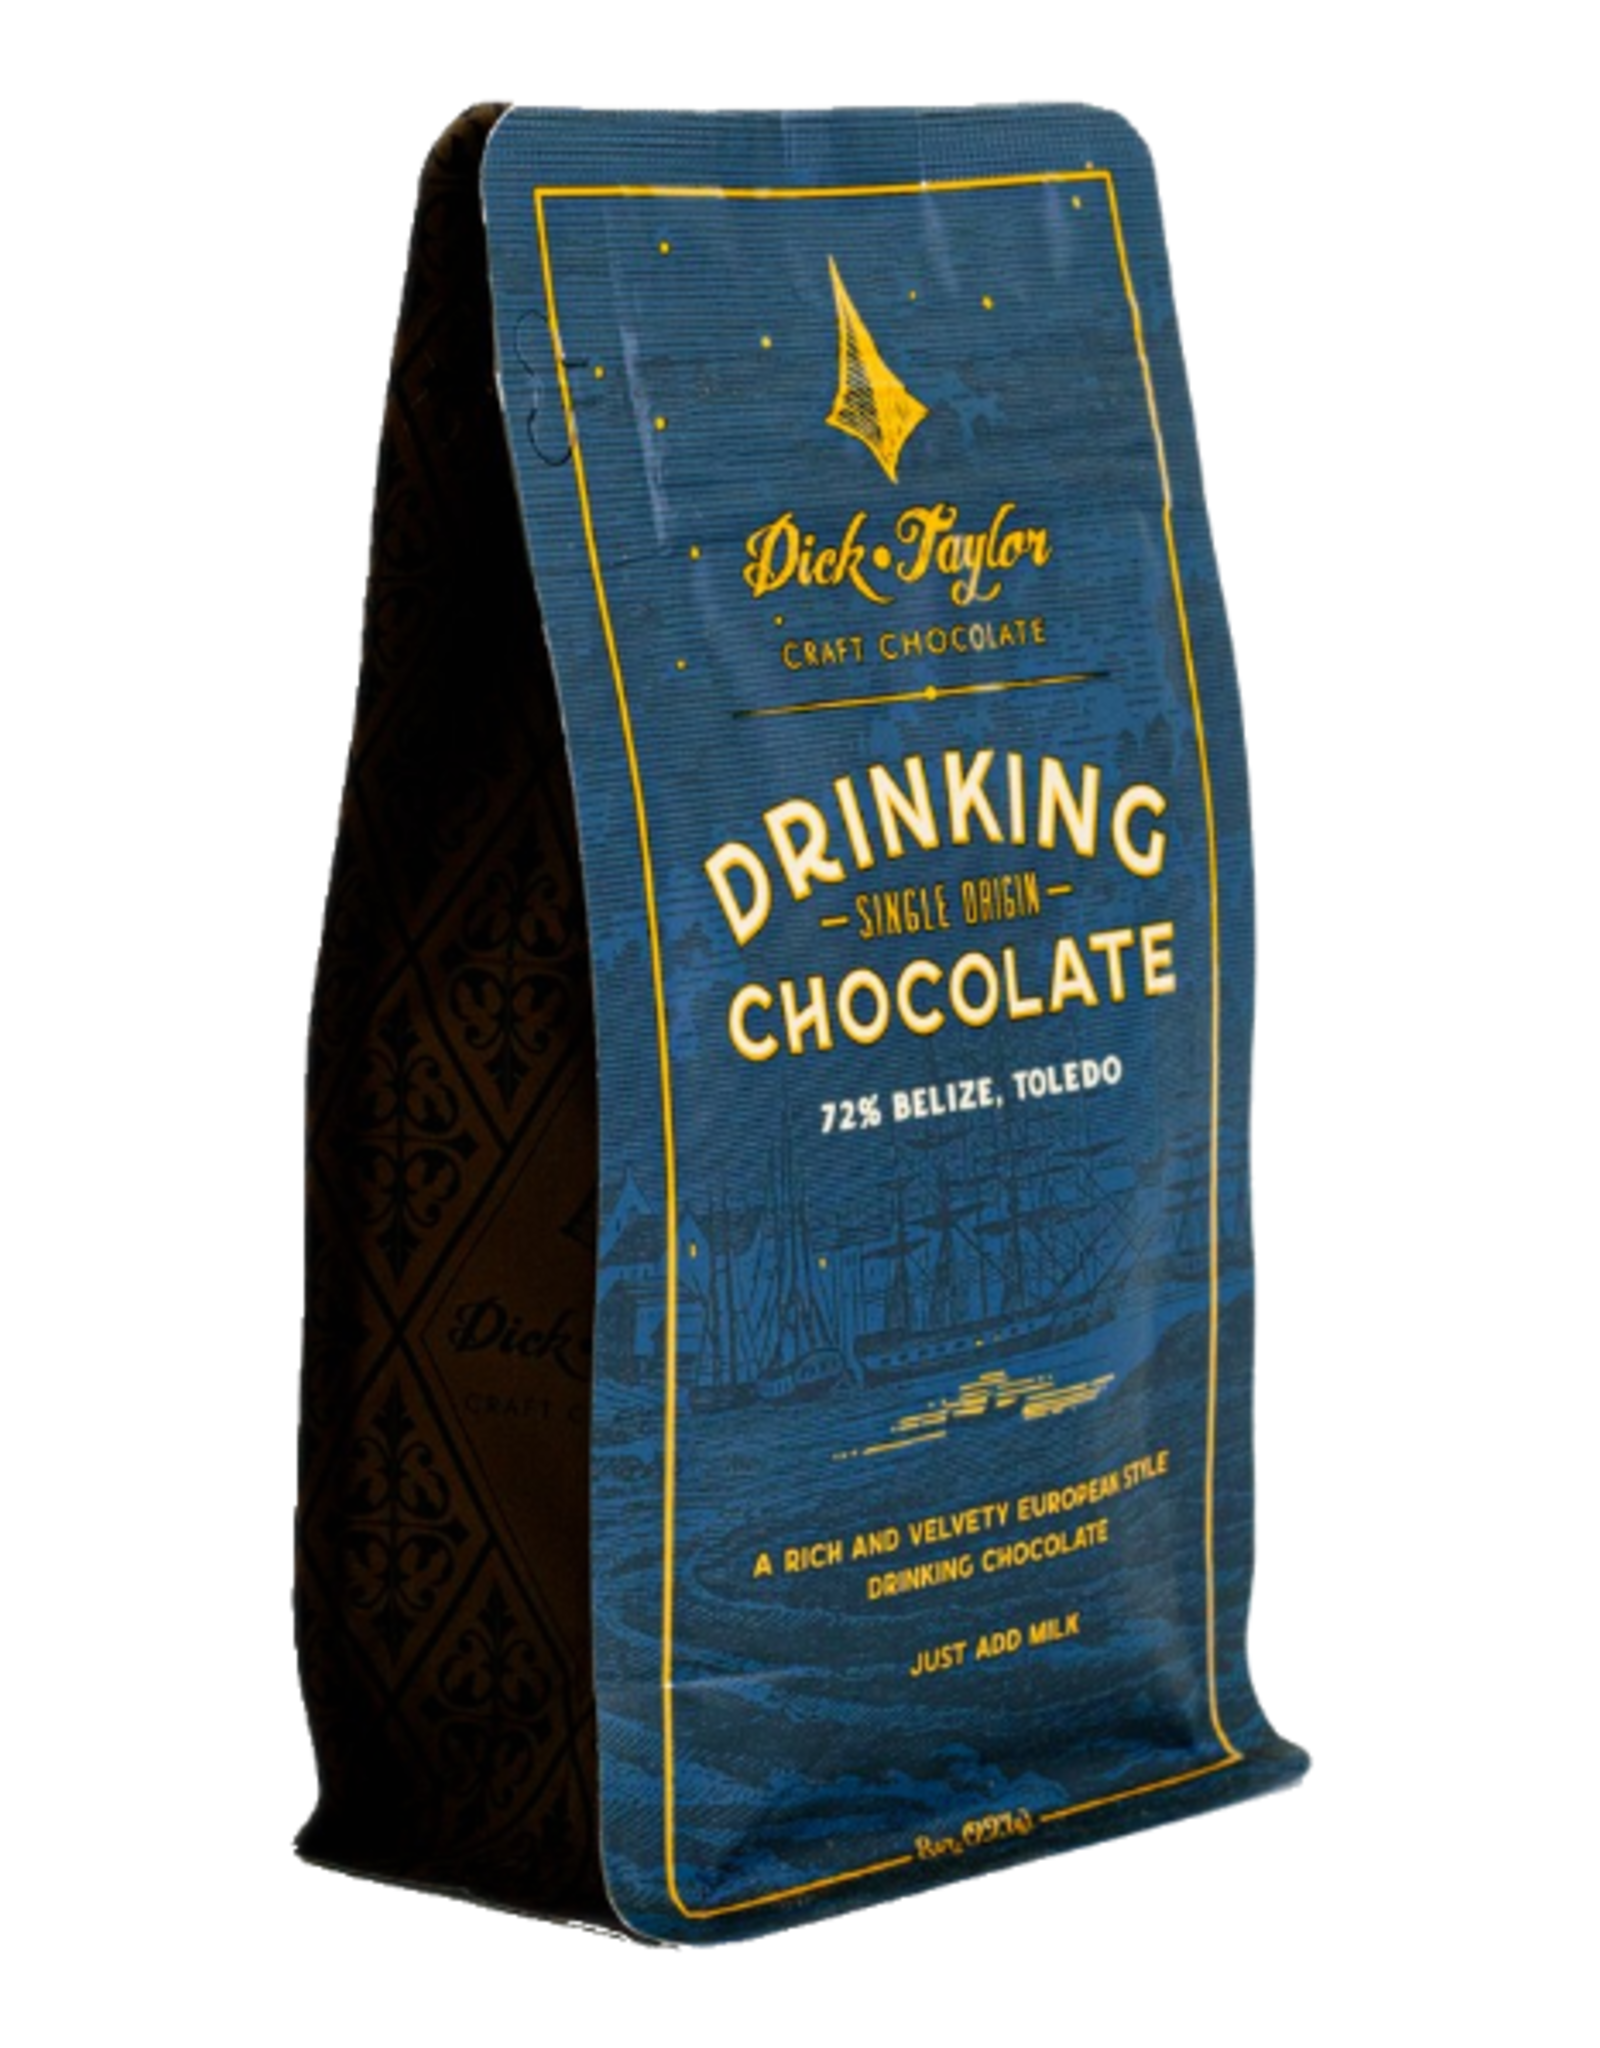 DICK TAYLOR Drinking Chocolate Belize